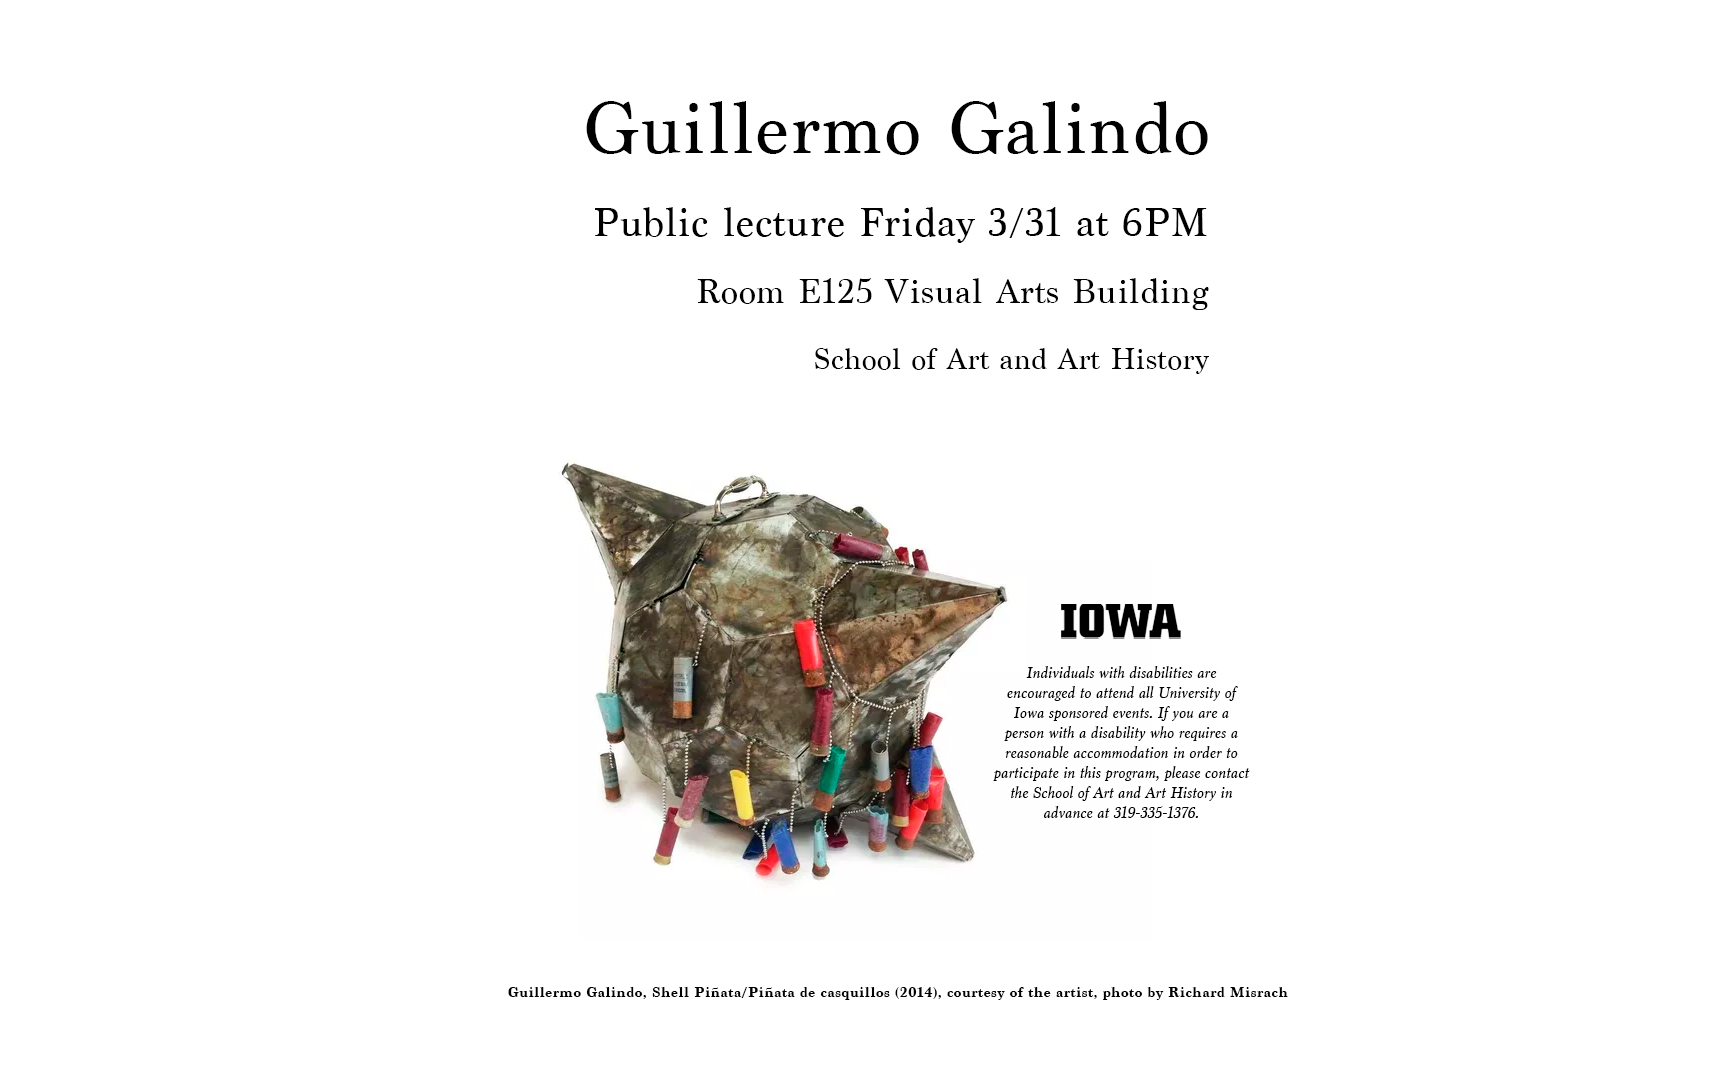 Guillermo Galindo visiting artist in photography lecture friday 3/31/23 6:00pm E125 Visual Arts Building.